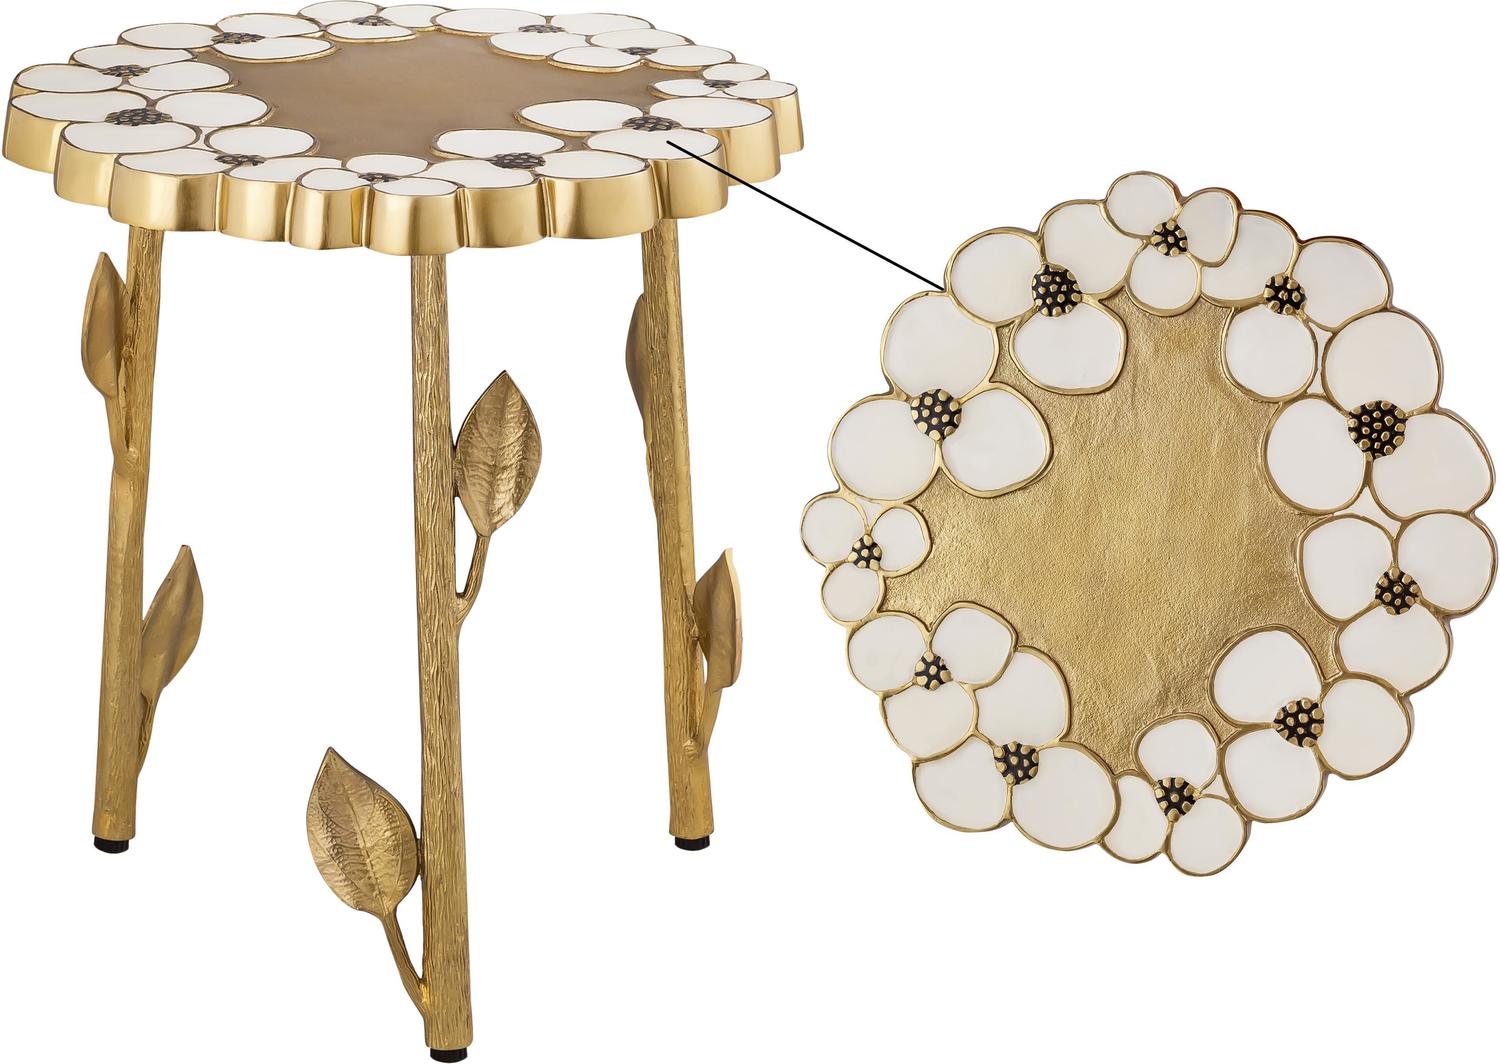 Contemporary Design Furniture Side Tables Accent Tables